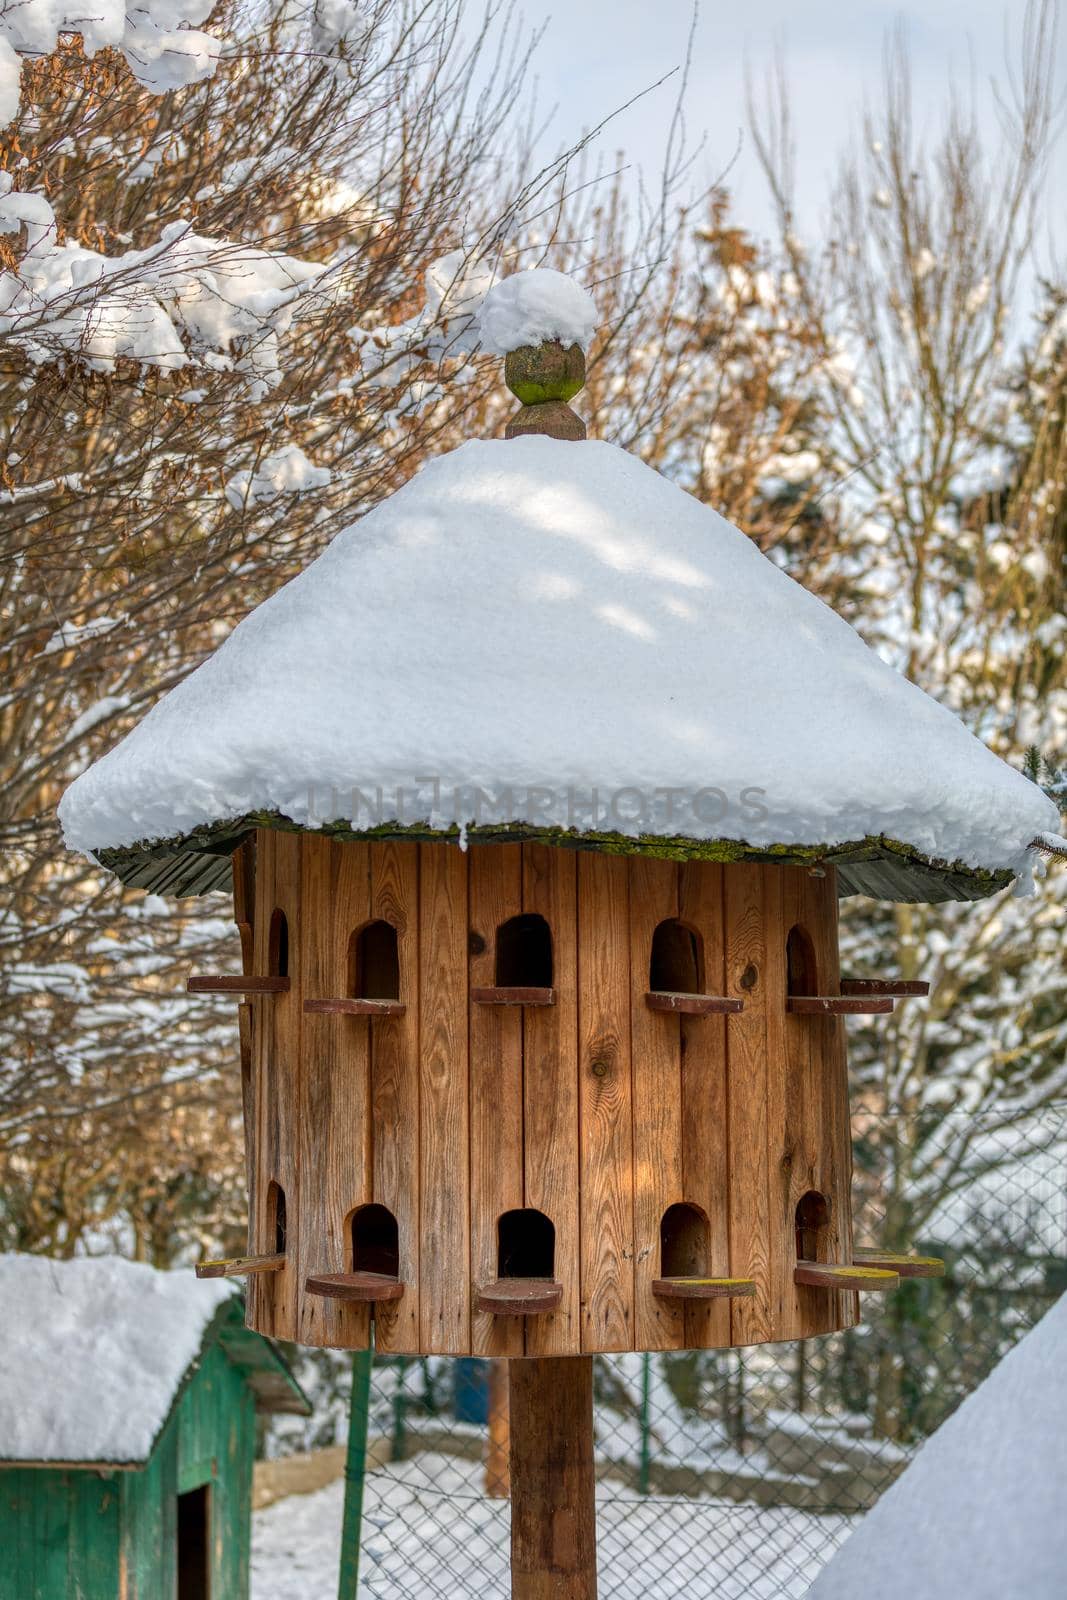 Wooden Dovecote with a roof cowered by snow by artush